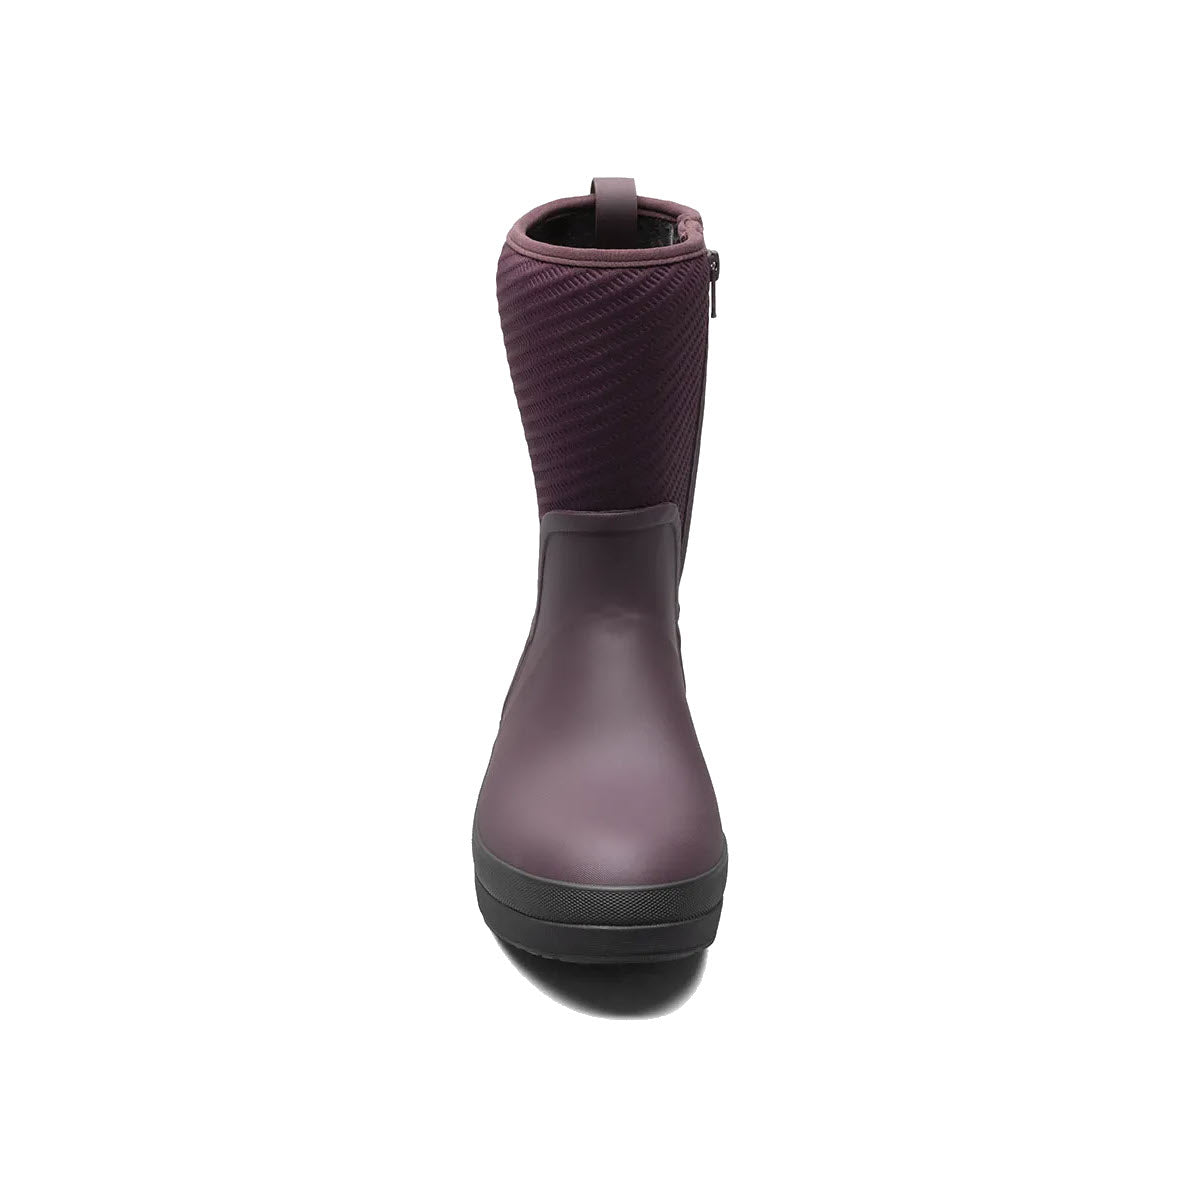 A single wine-colored Bogs Crandall II Mid Zip boot with a textured upper section and side zipper, displayed against a white background.